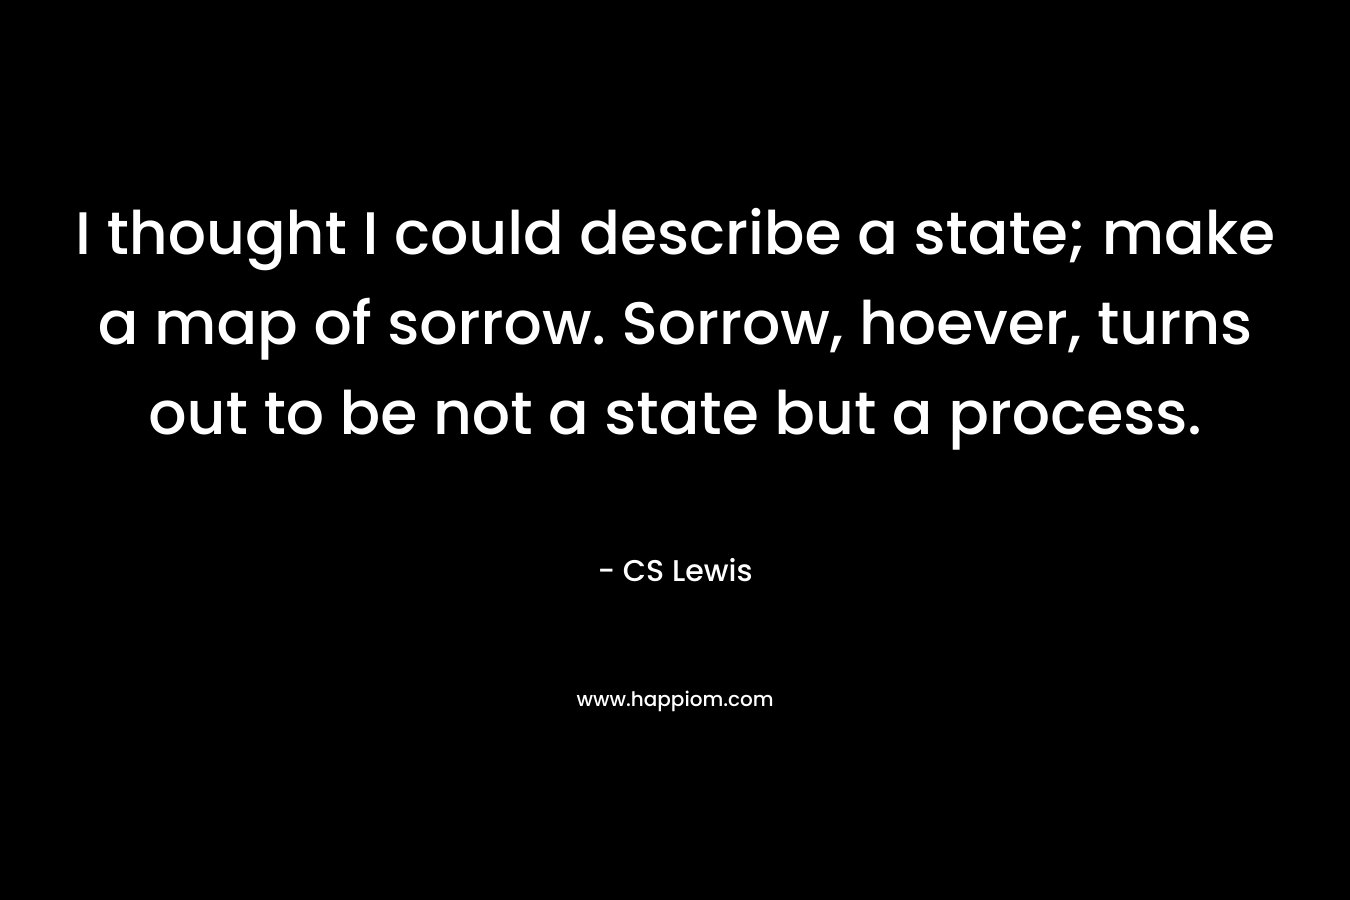 I thought I could describe a state; make a map of sorrow. Sorrow, hoever, turns out to be not a state but a process.